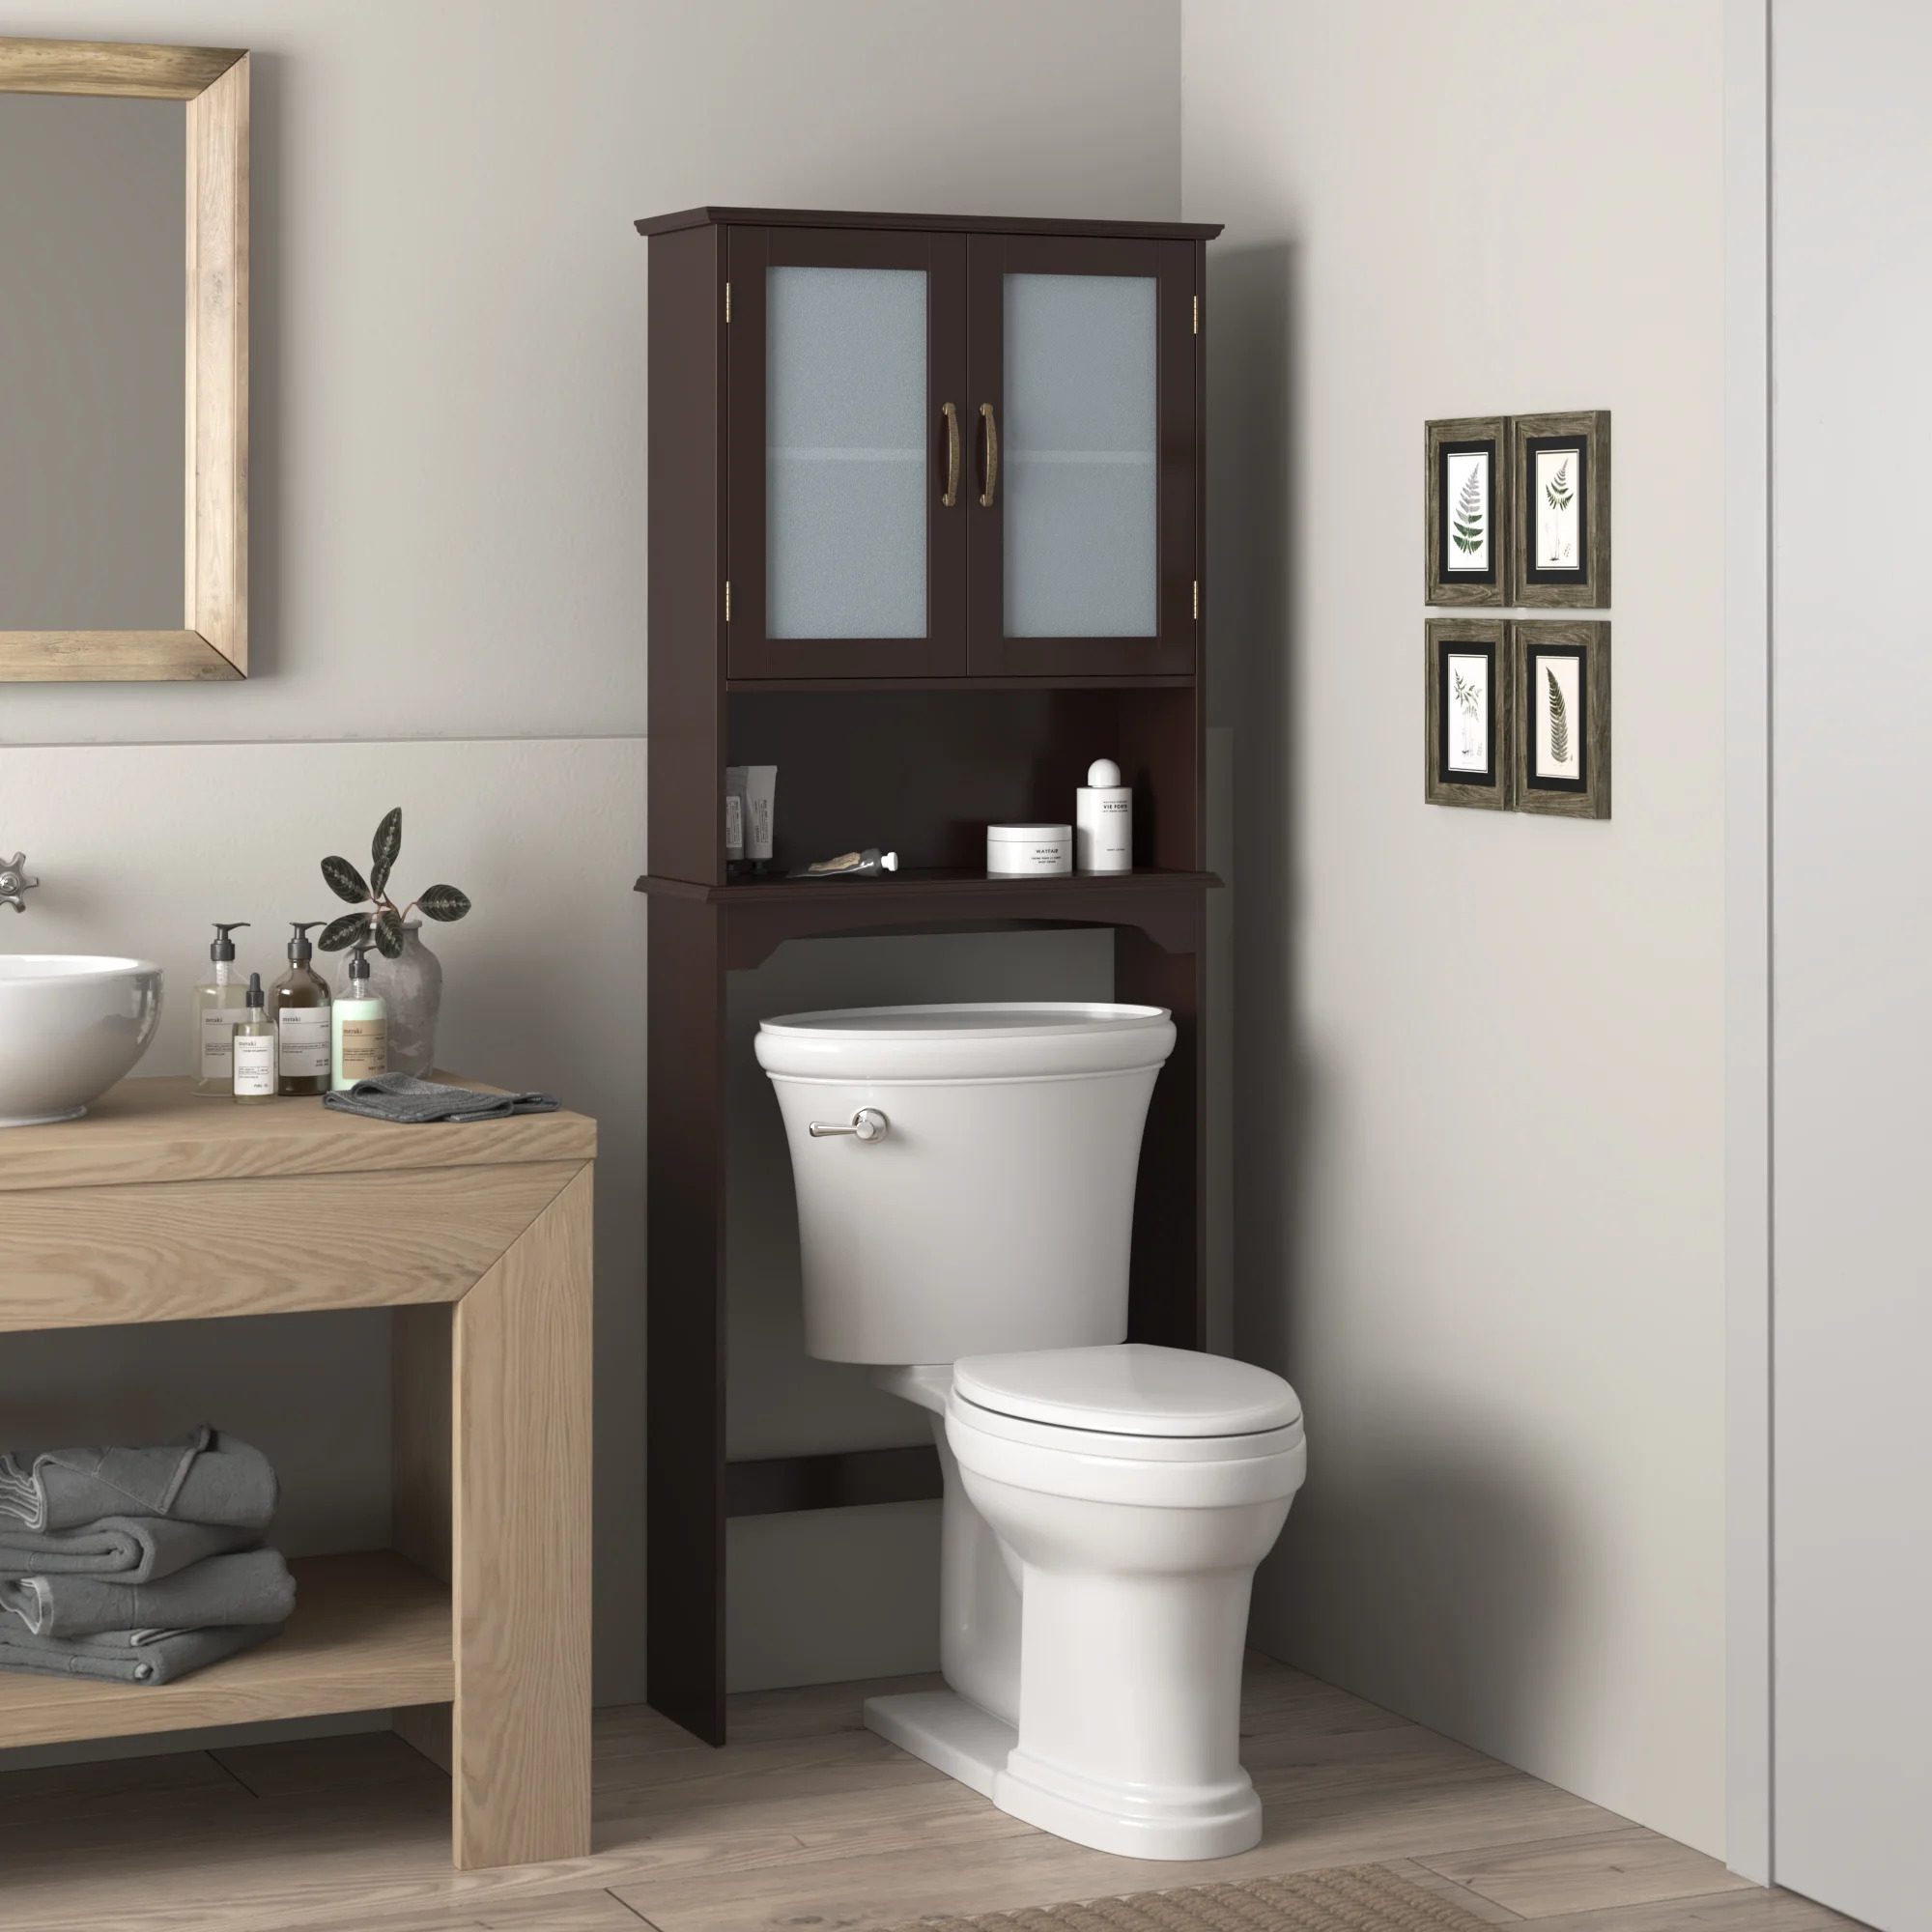 25 Space-Saver Bathroom Organizers That Increase Storage Without